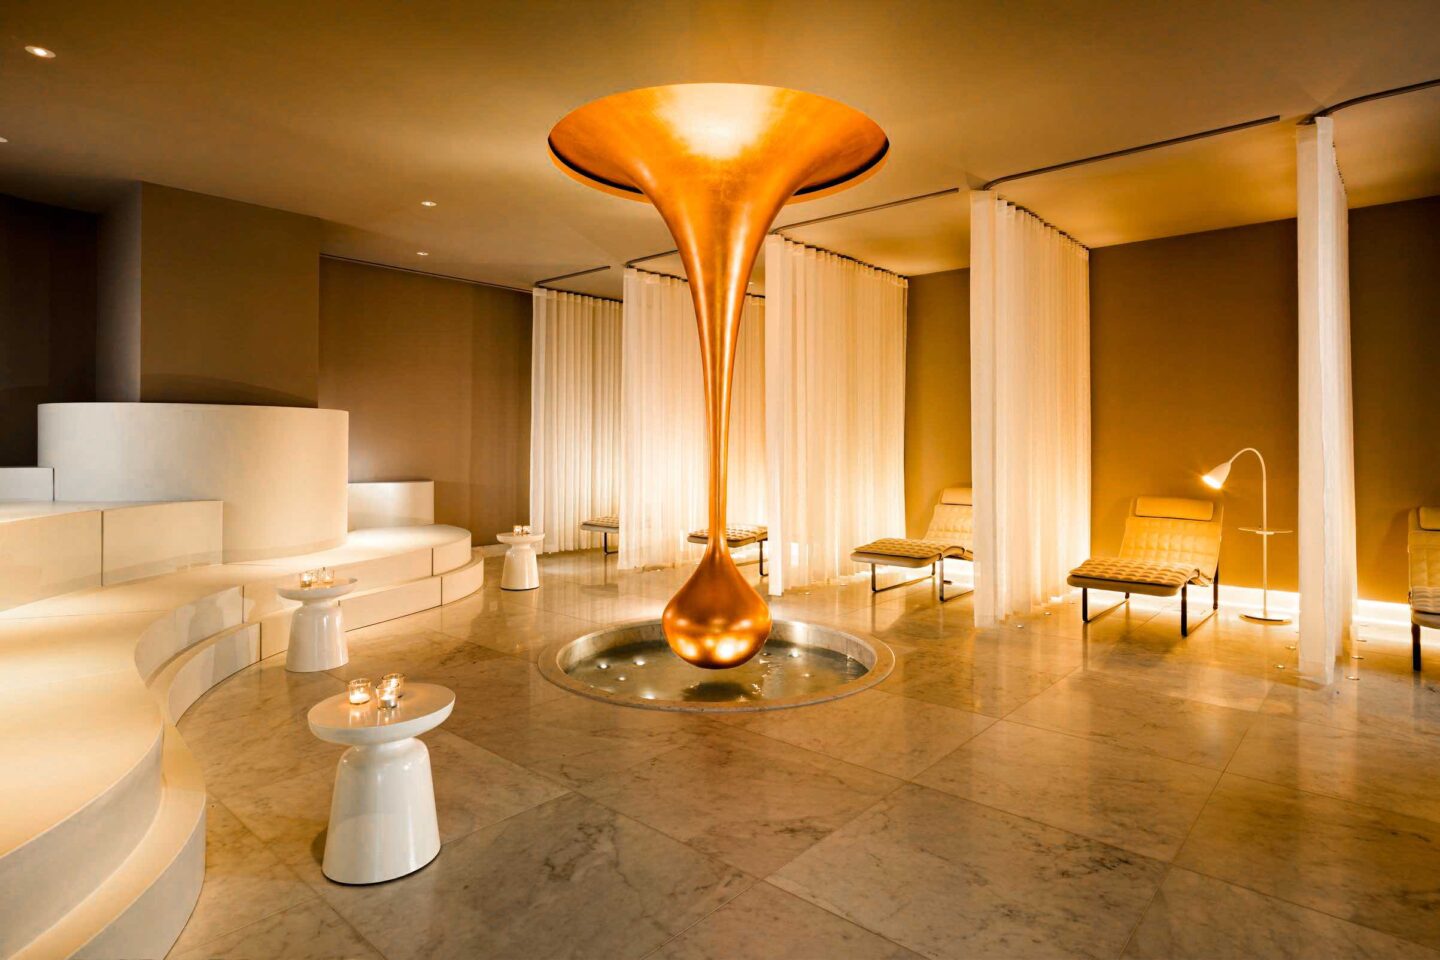 Agua Spa Sea Containers London Relaxation Room